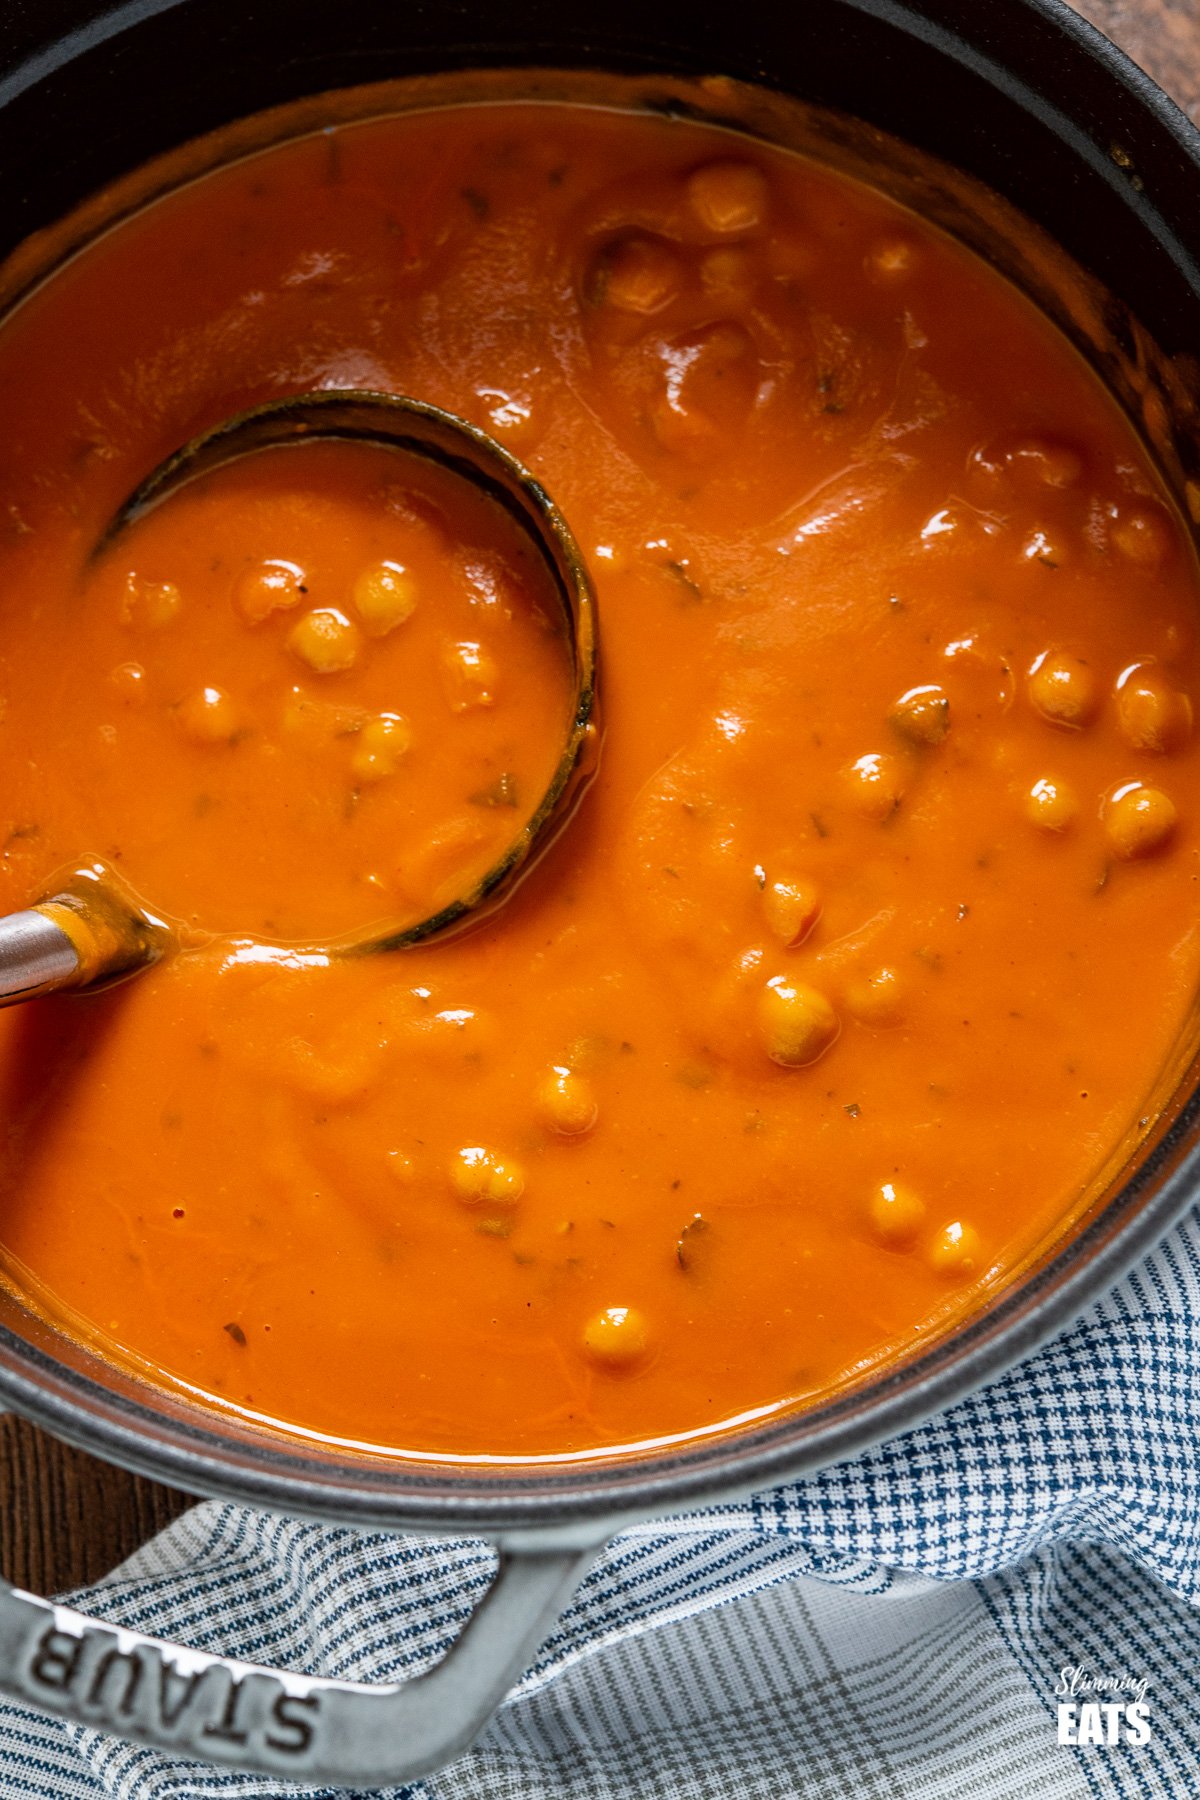 close up of soup spoon in Chickpea and Tomato Soup in grey staub cast iron pan.